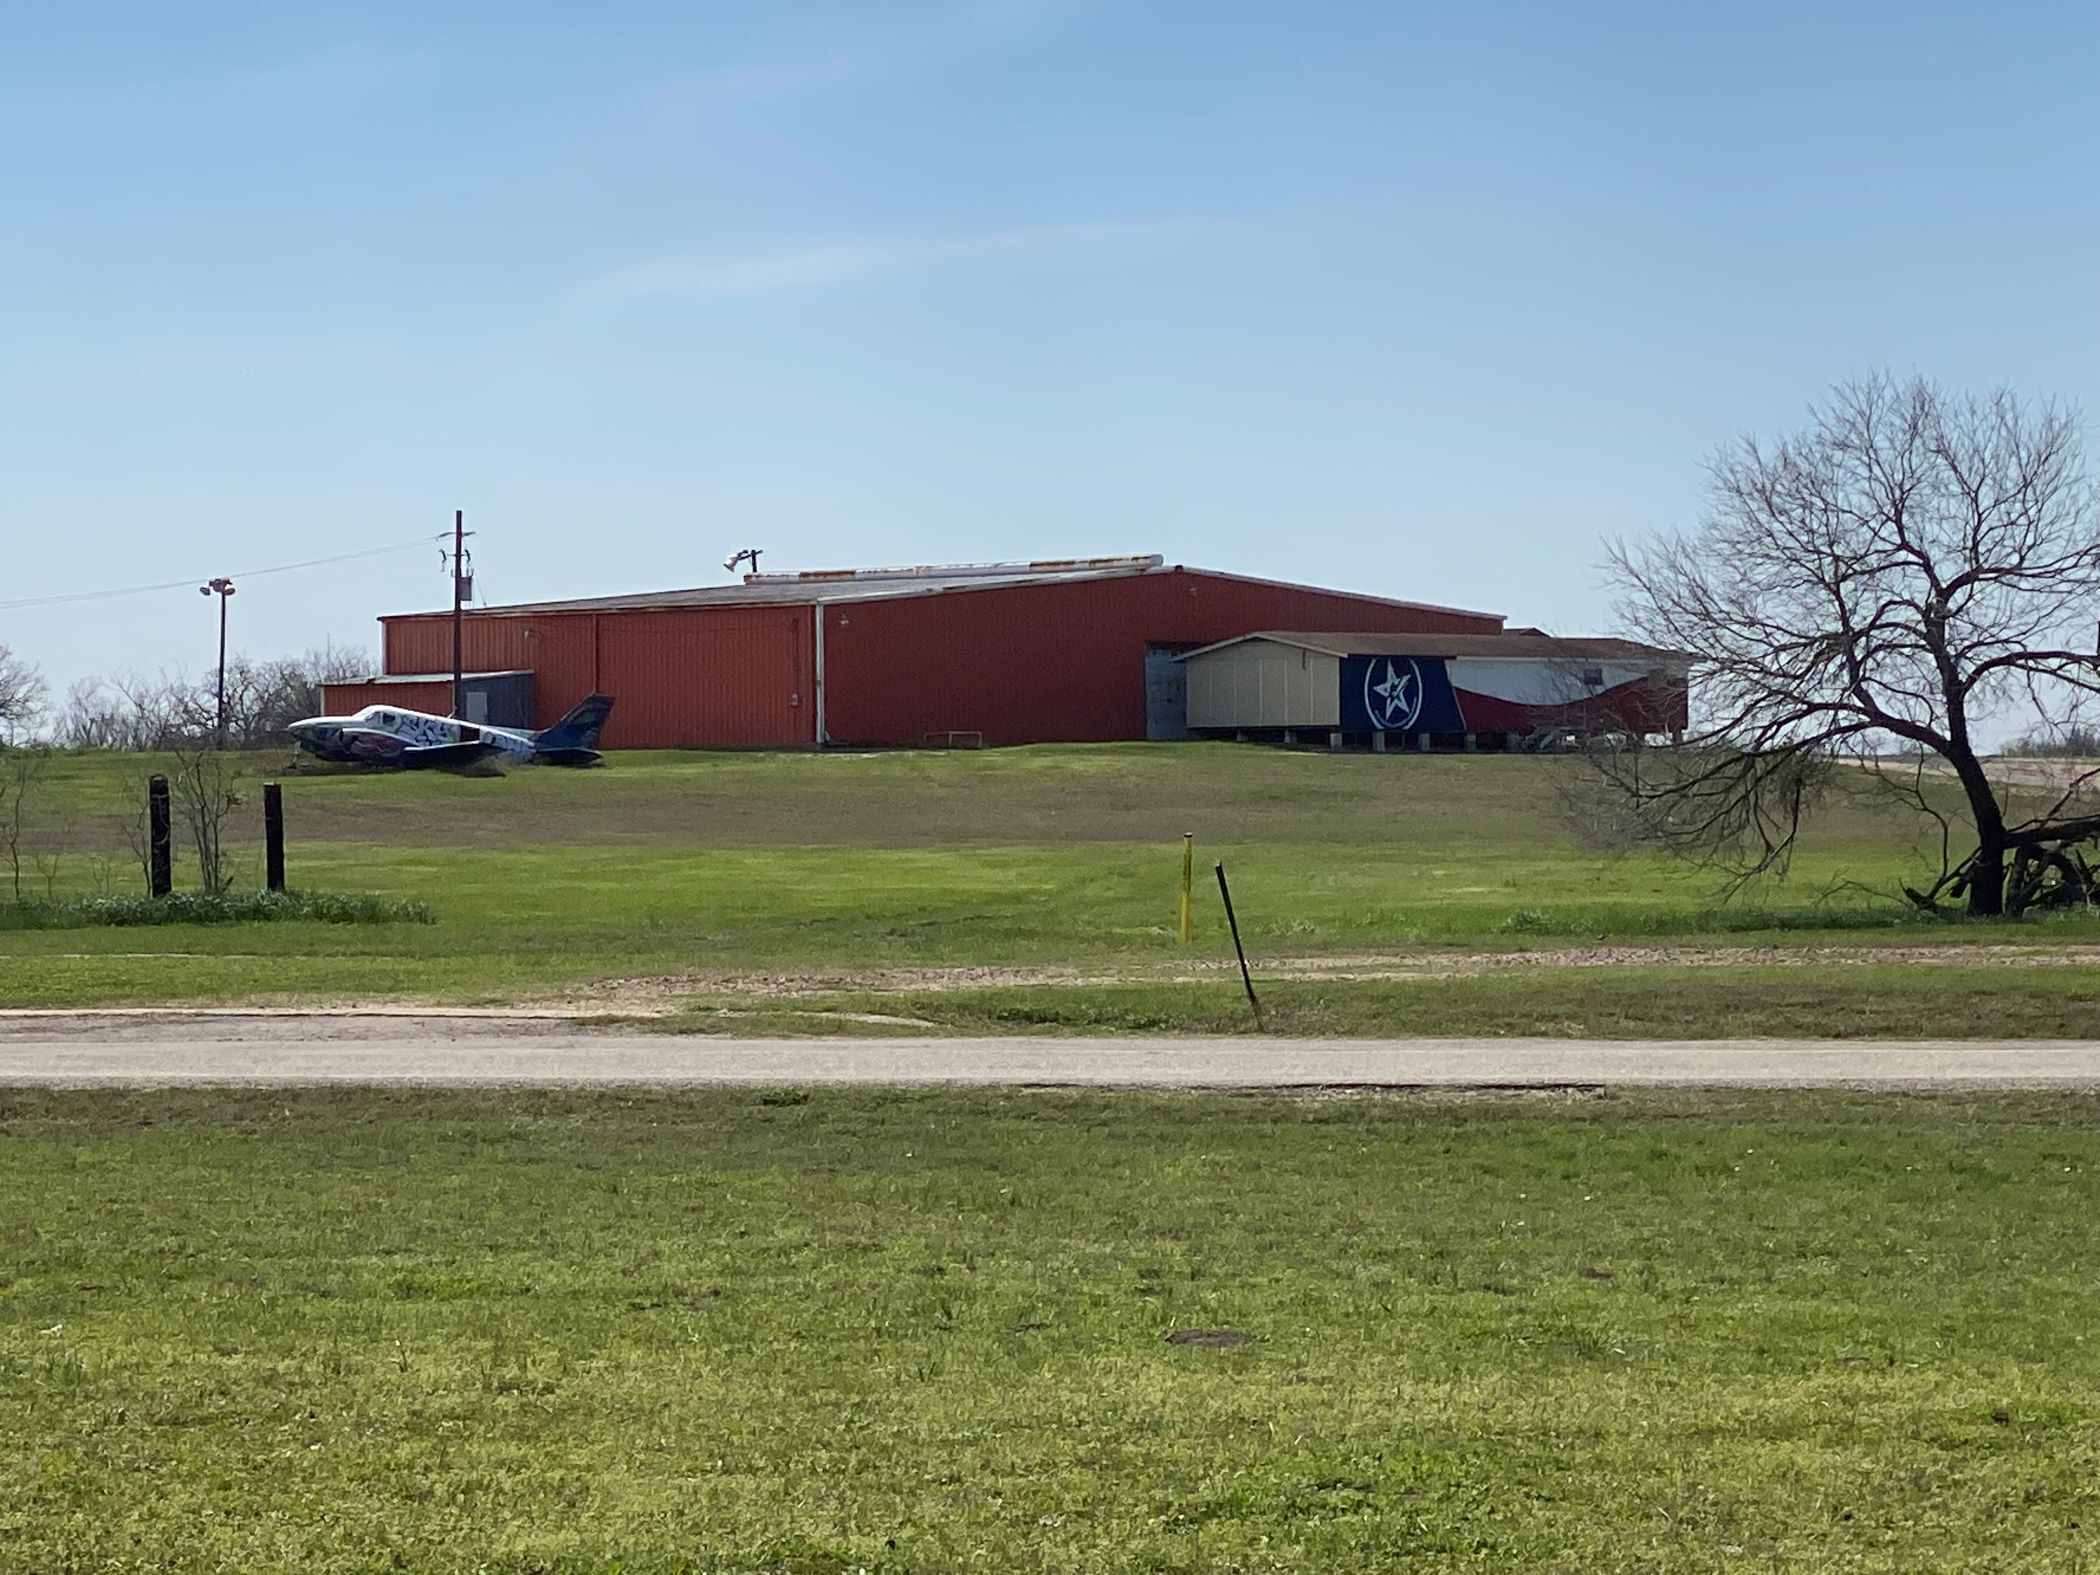 New Mexico-based X-Bow Systems Inc. is converting a decommissioned airport in Luling, Texas, into a solid rocket motor manufacturing facility. (Parimal M. Rohit/CoStar)